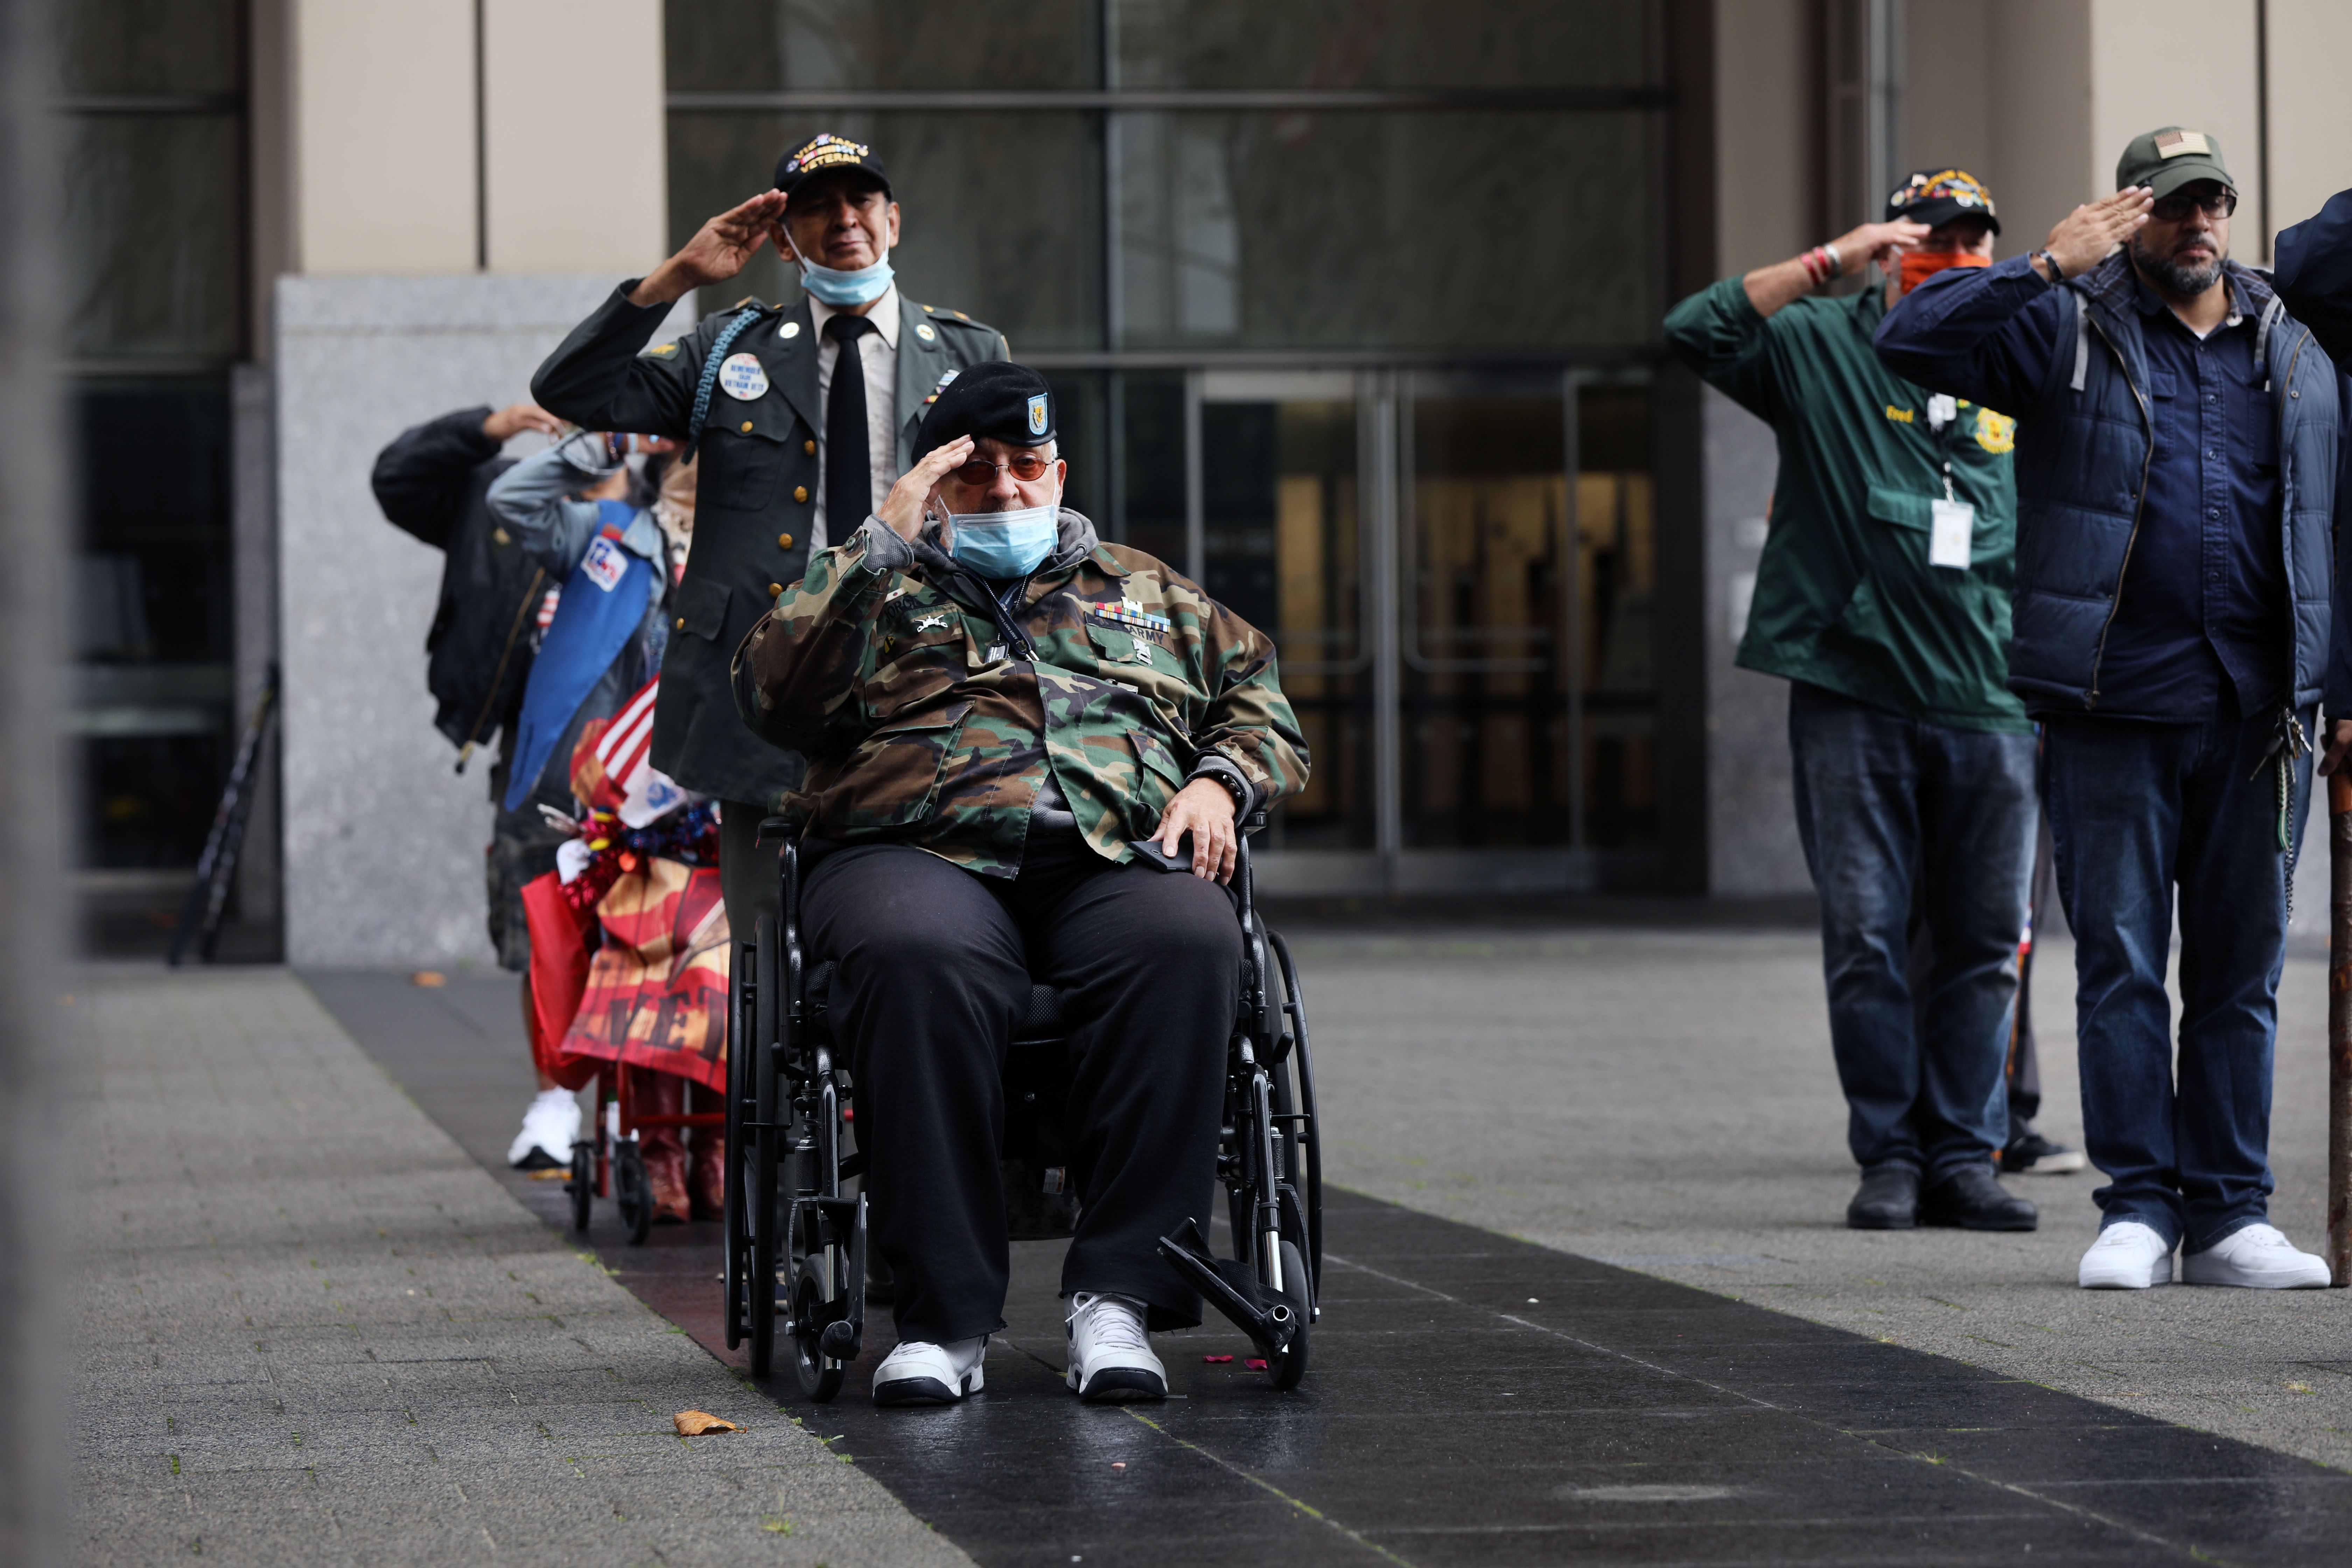 Veterans of the Vietnam War and others gather at the Vietnam War Memorial in Manhattan on Veterans Day on November 11, 2020 in New York City